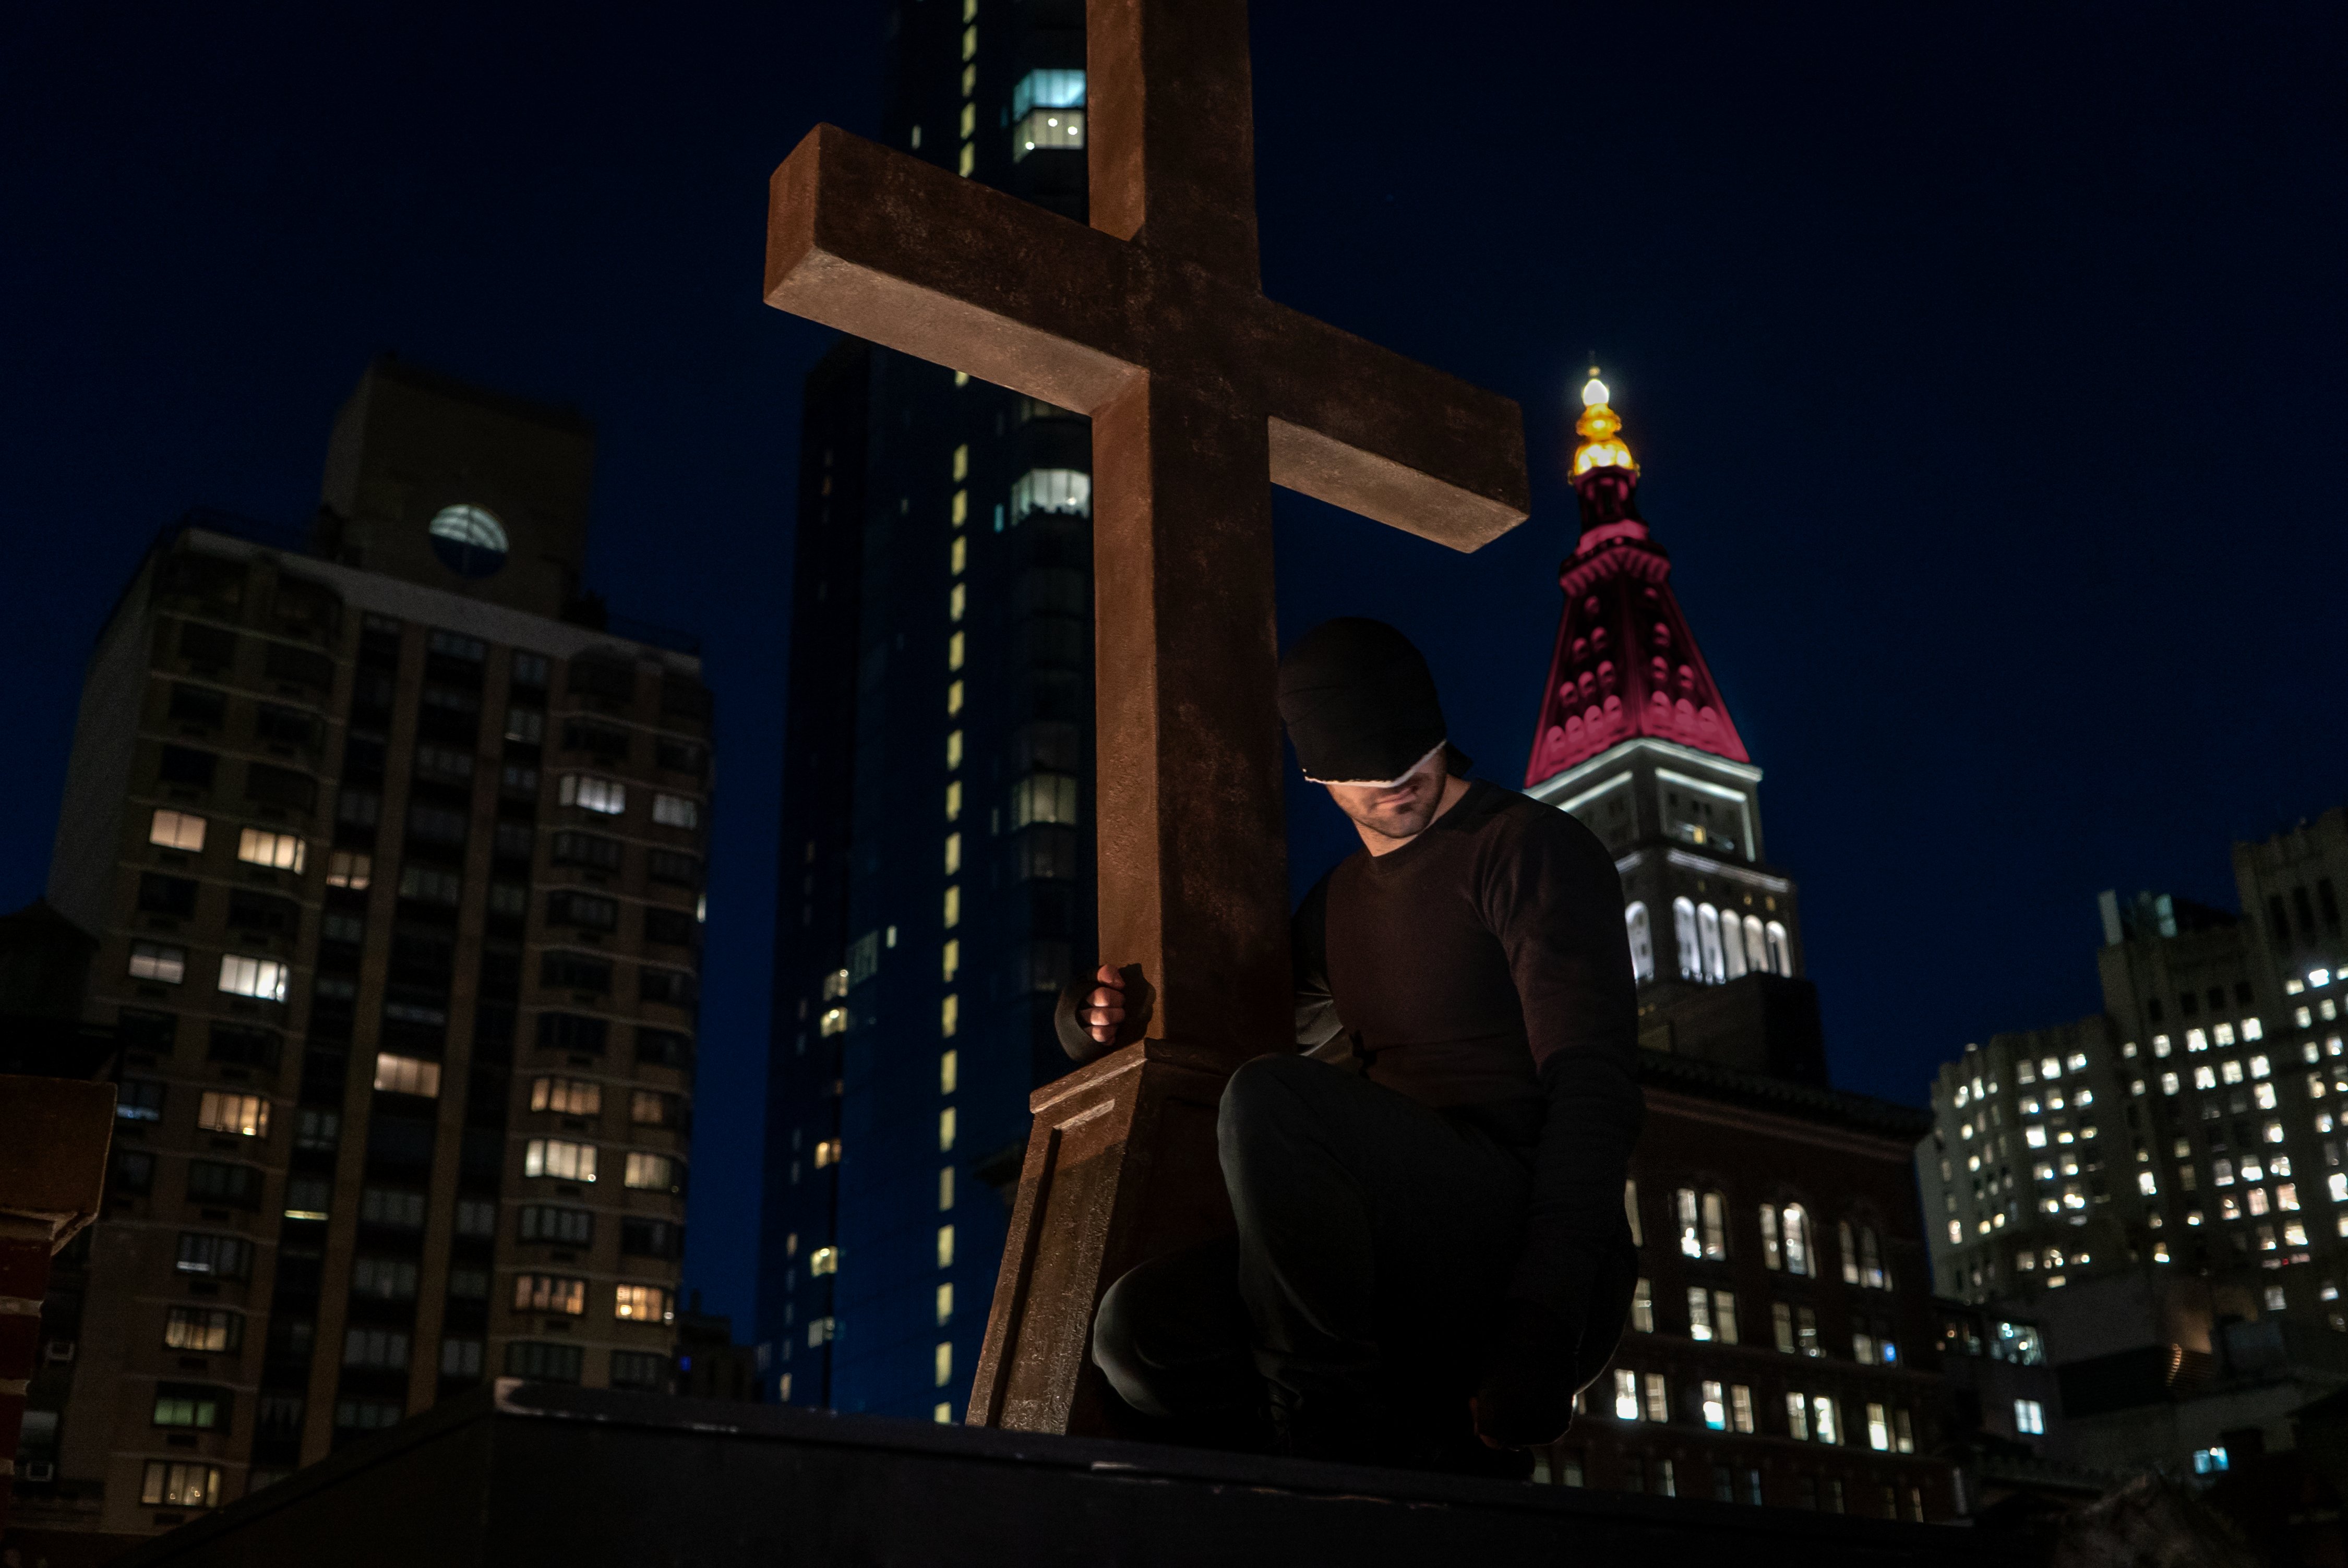 Daredevil Season 3 Hd Tv Shows 4k Wallpapers Images Backgrounds